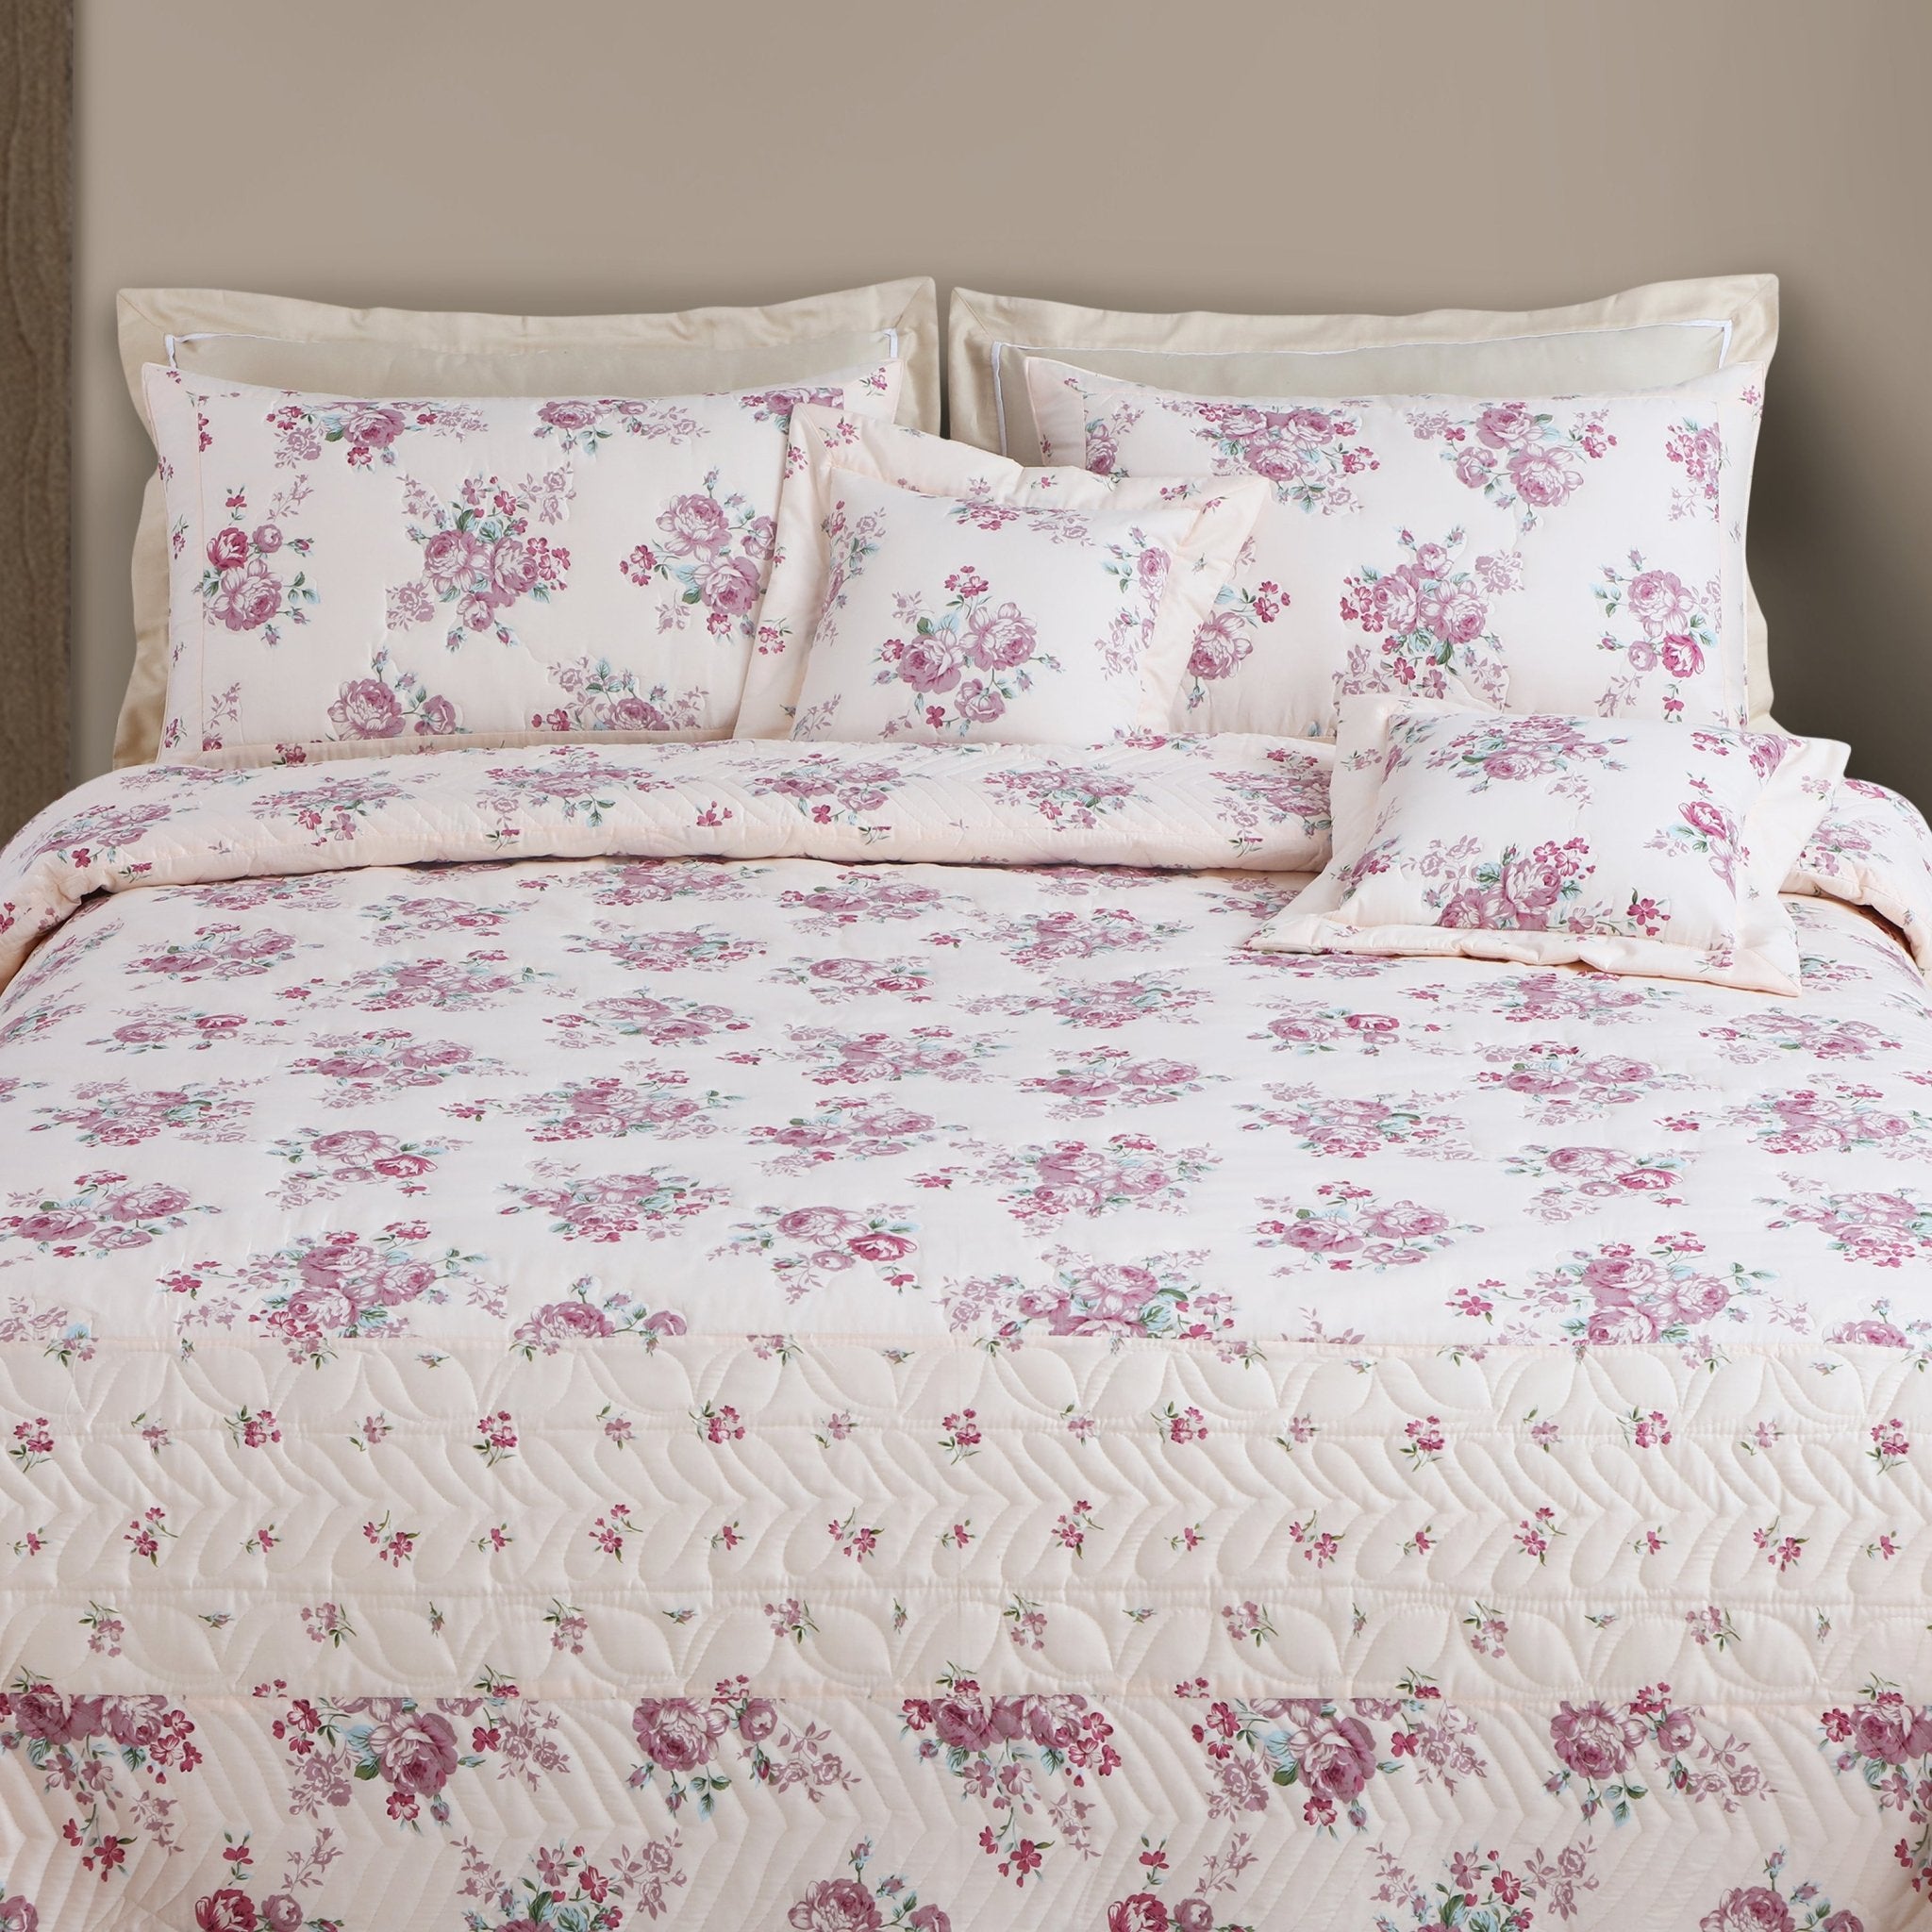 Malako Royale 100% Cotton Off White Floral King Size 5 Piece Quilted Bedspread Set - MALAKO